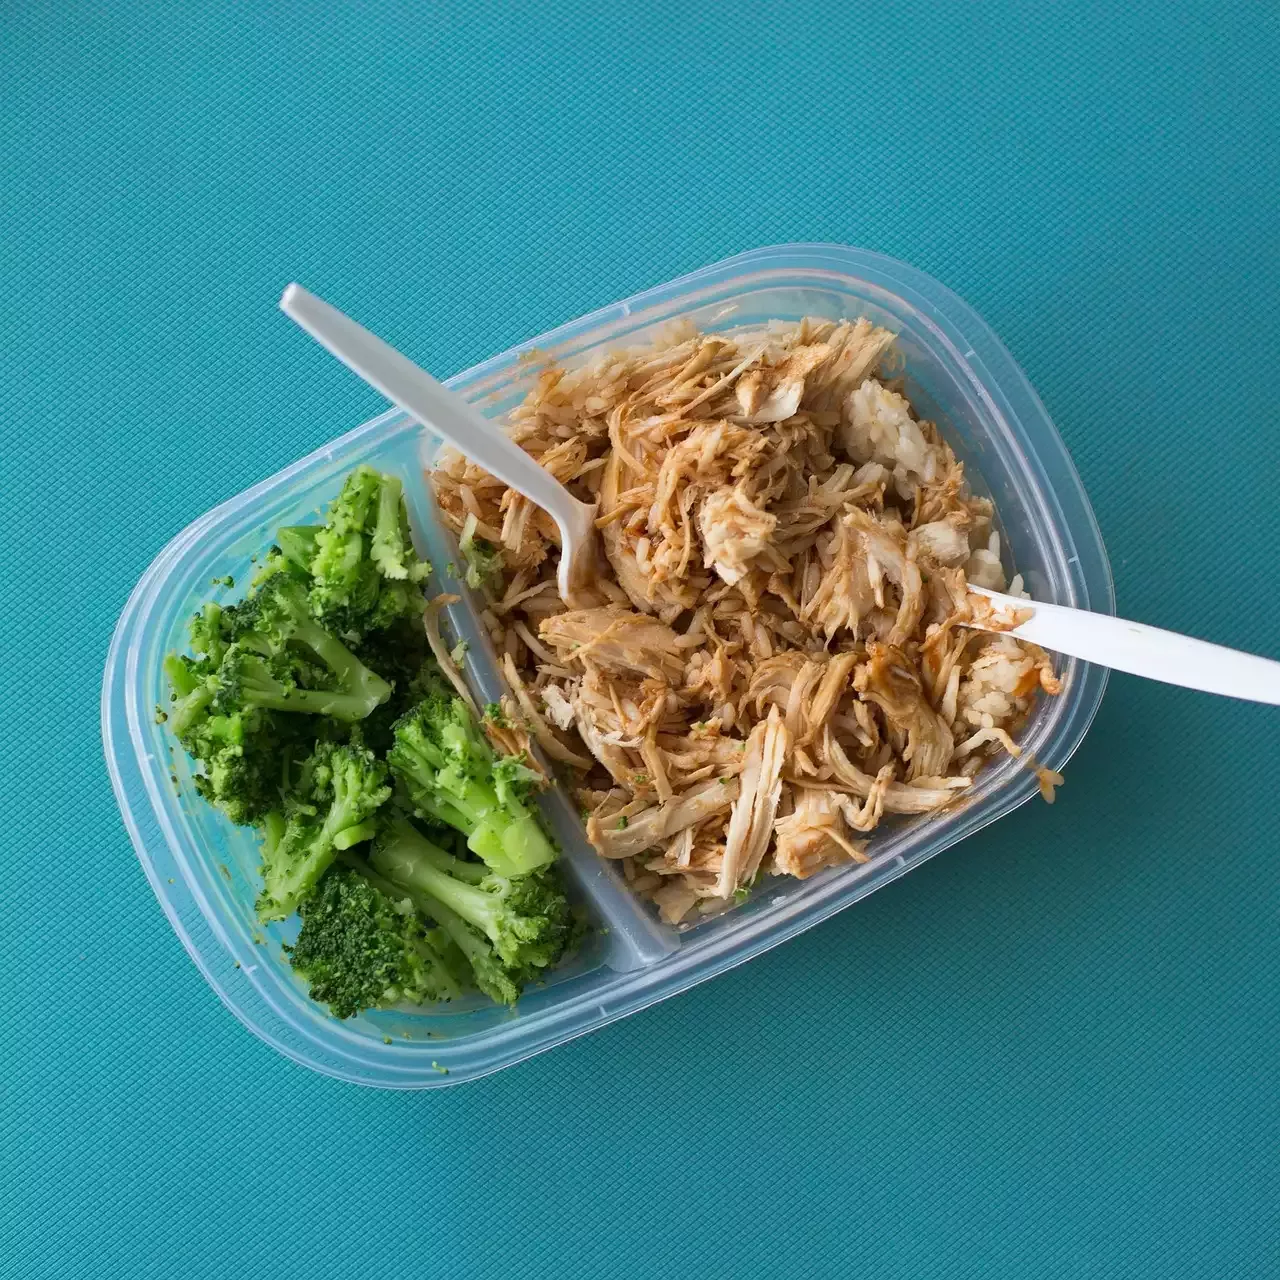 How to Pack a Zero Waste Lunch: Tips and Tricks